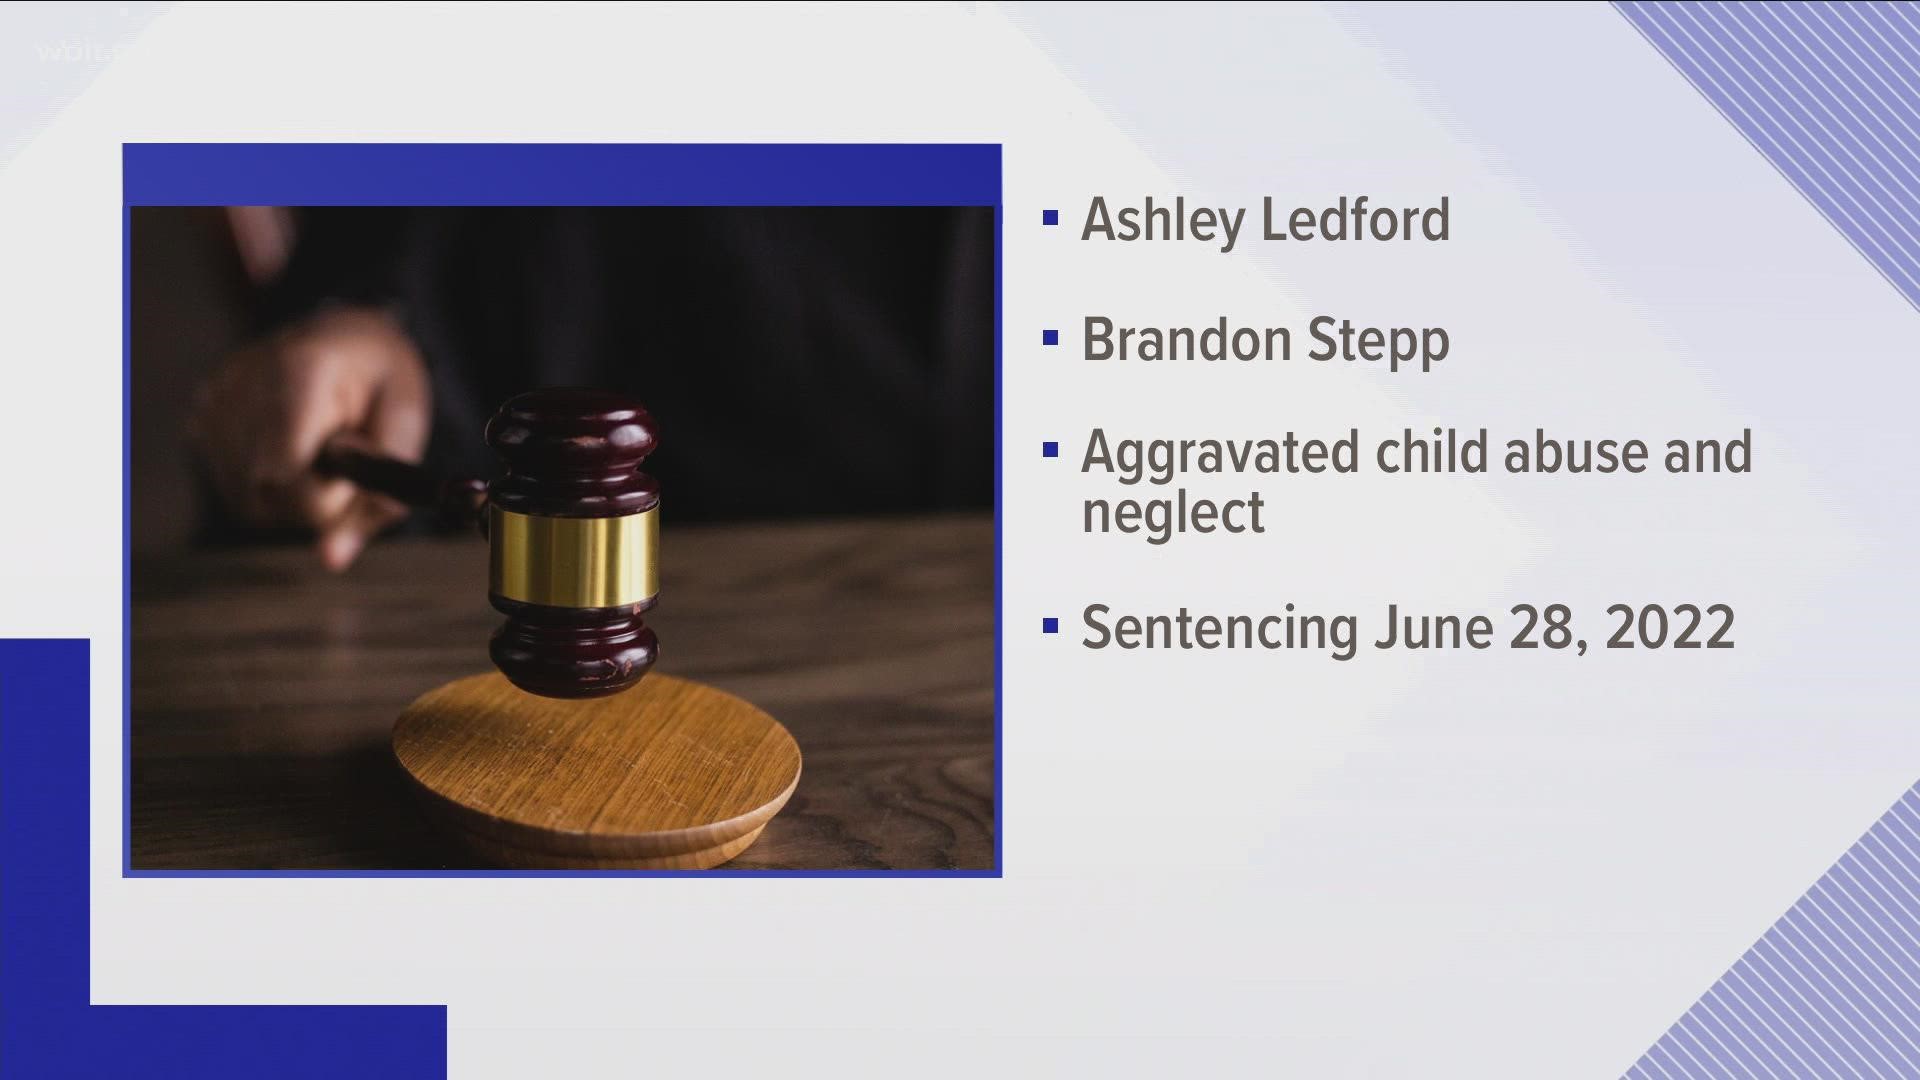 Ashley Ledford and Brandon Stepp were found guilty of  aggravated child abuse and neglect.